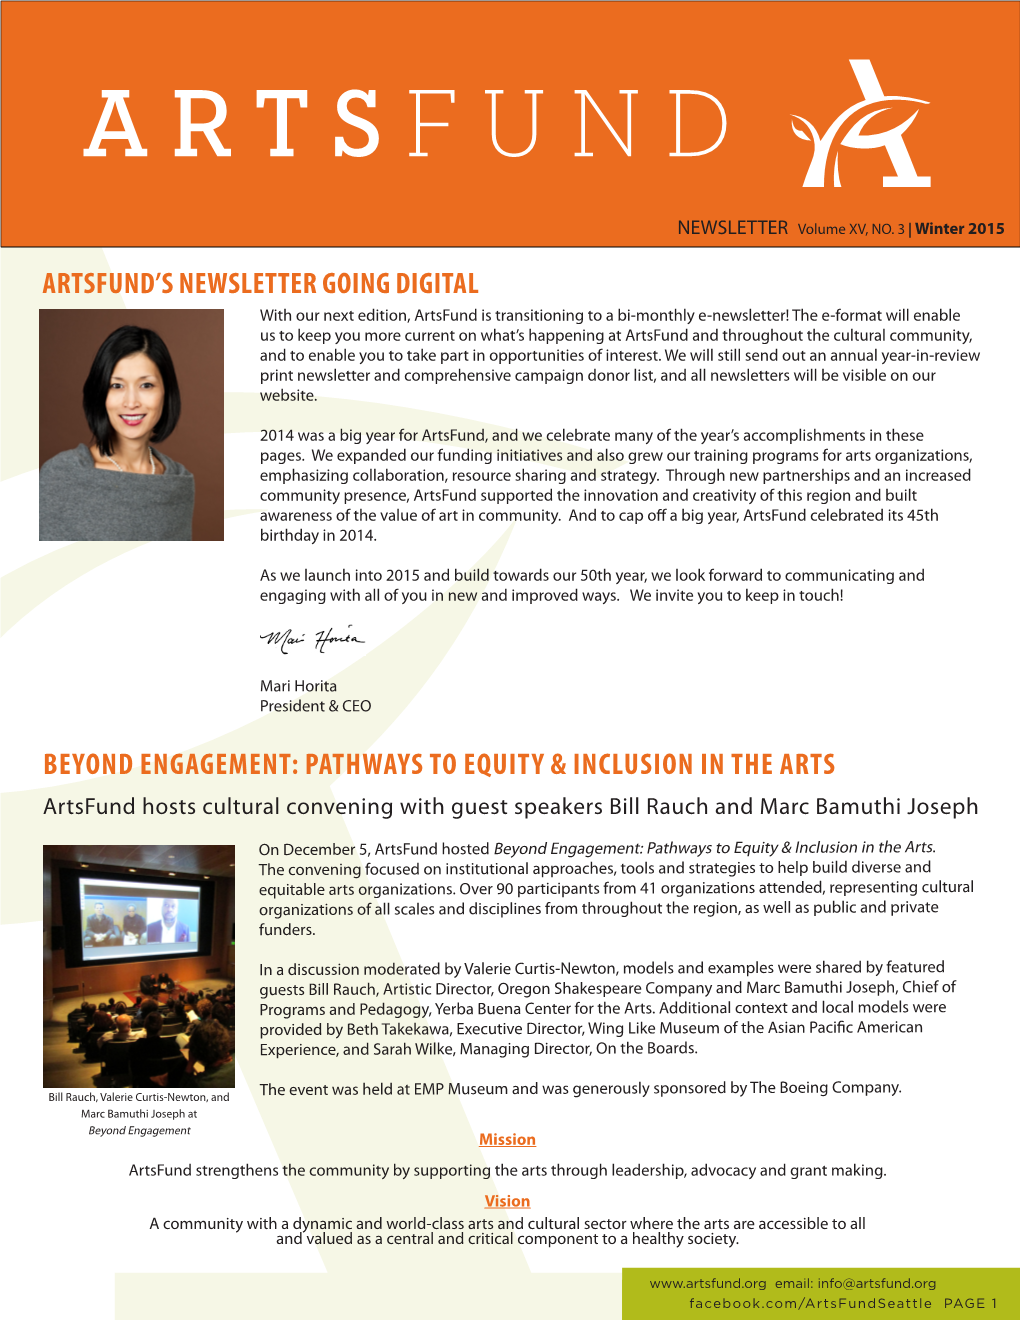 BEYOND ENGAGEMENT: PATHWAYS to EQUITY & INCLUSION in the ARTS Artsfund Hosts Cultural Convening with Guest Speakers Bill Rauch and Marc Bamuthi Joseph